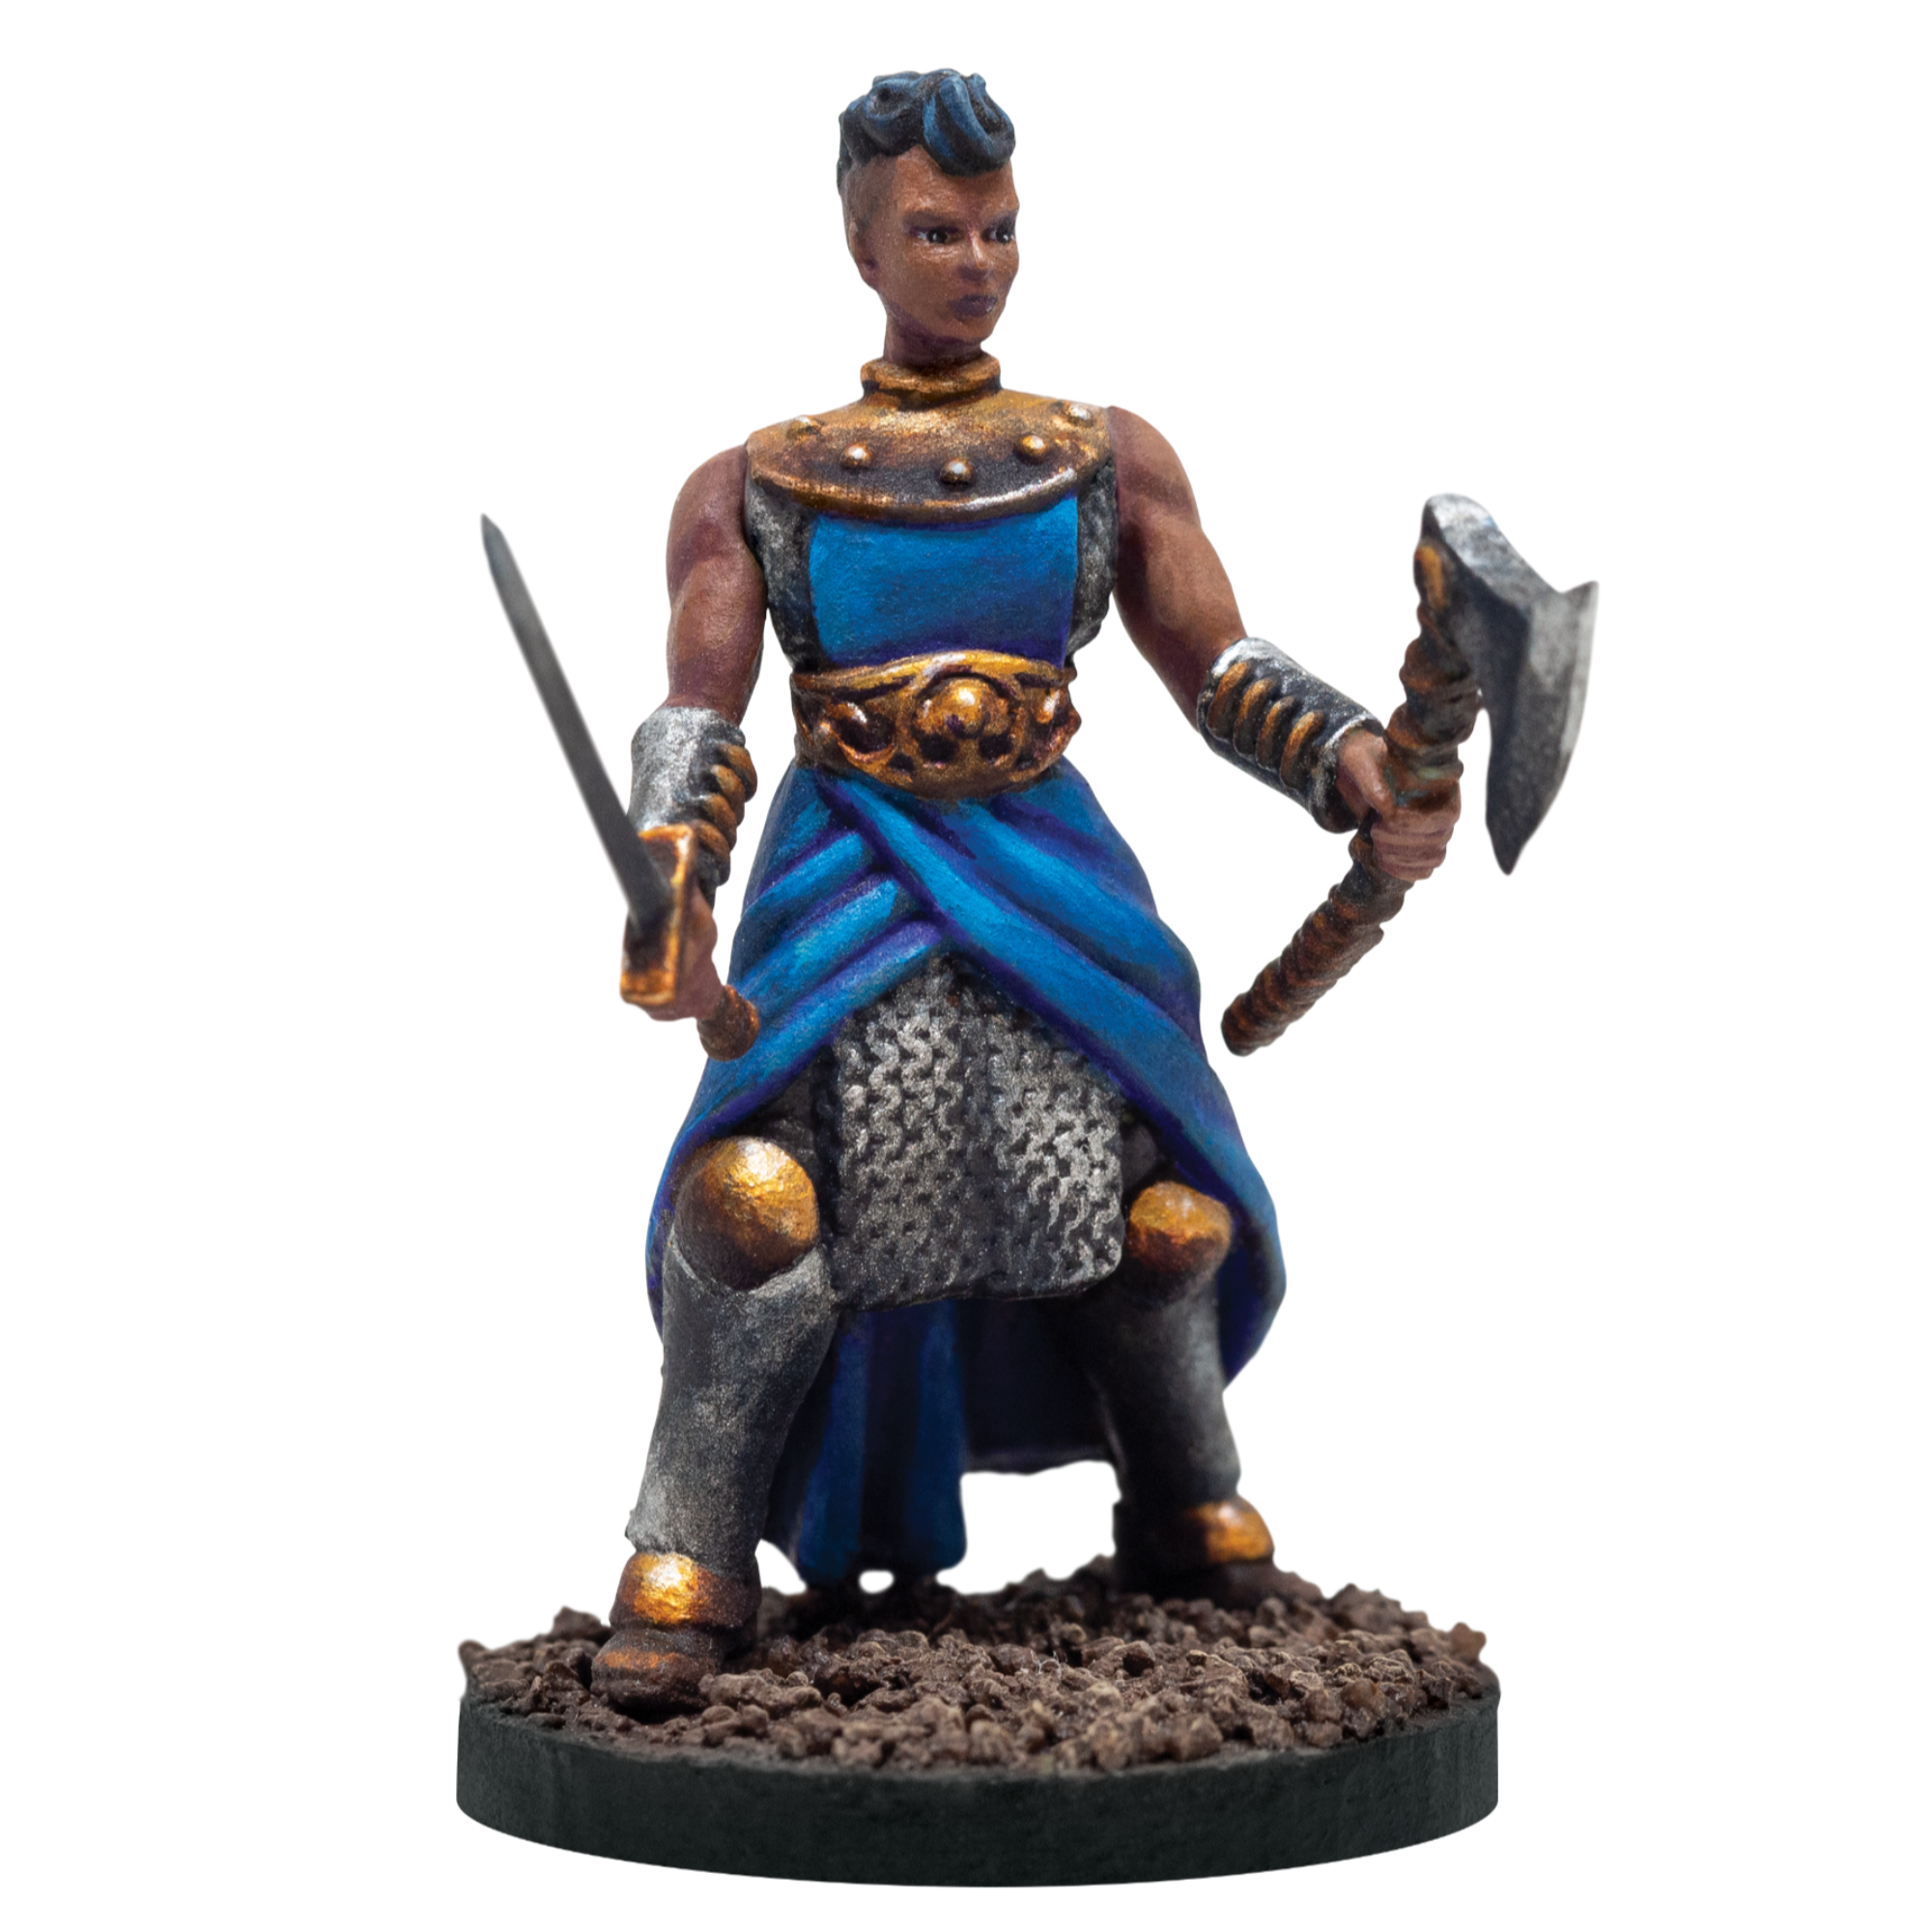 Astrid - Human Heavy Armored 28mm Miniature by Adventurers & Adversaries - A&A 0014